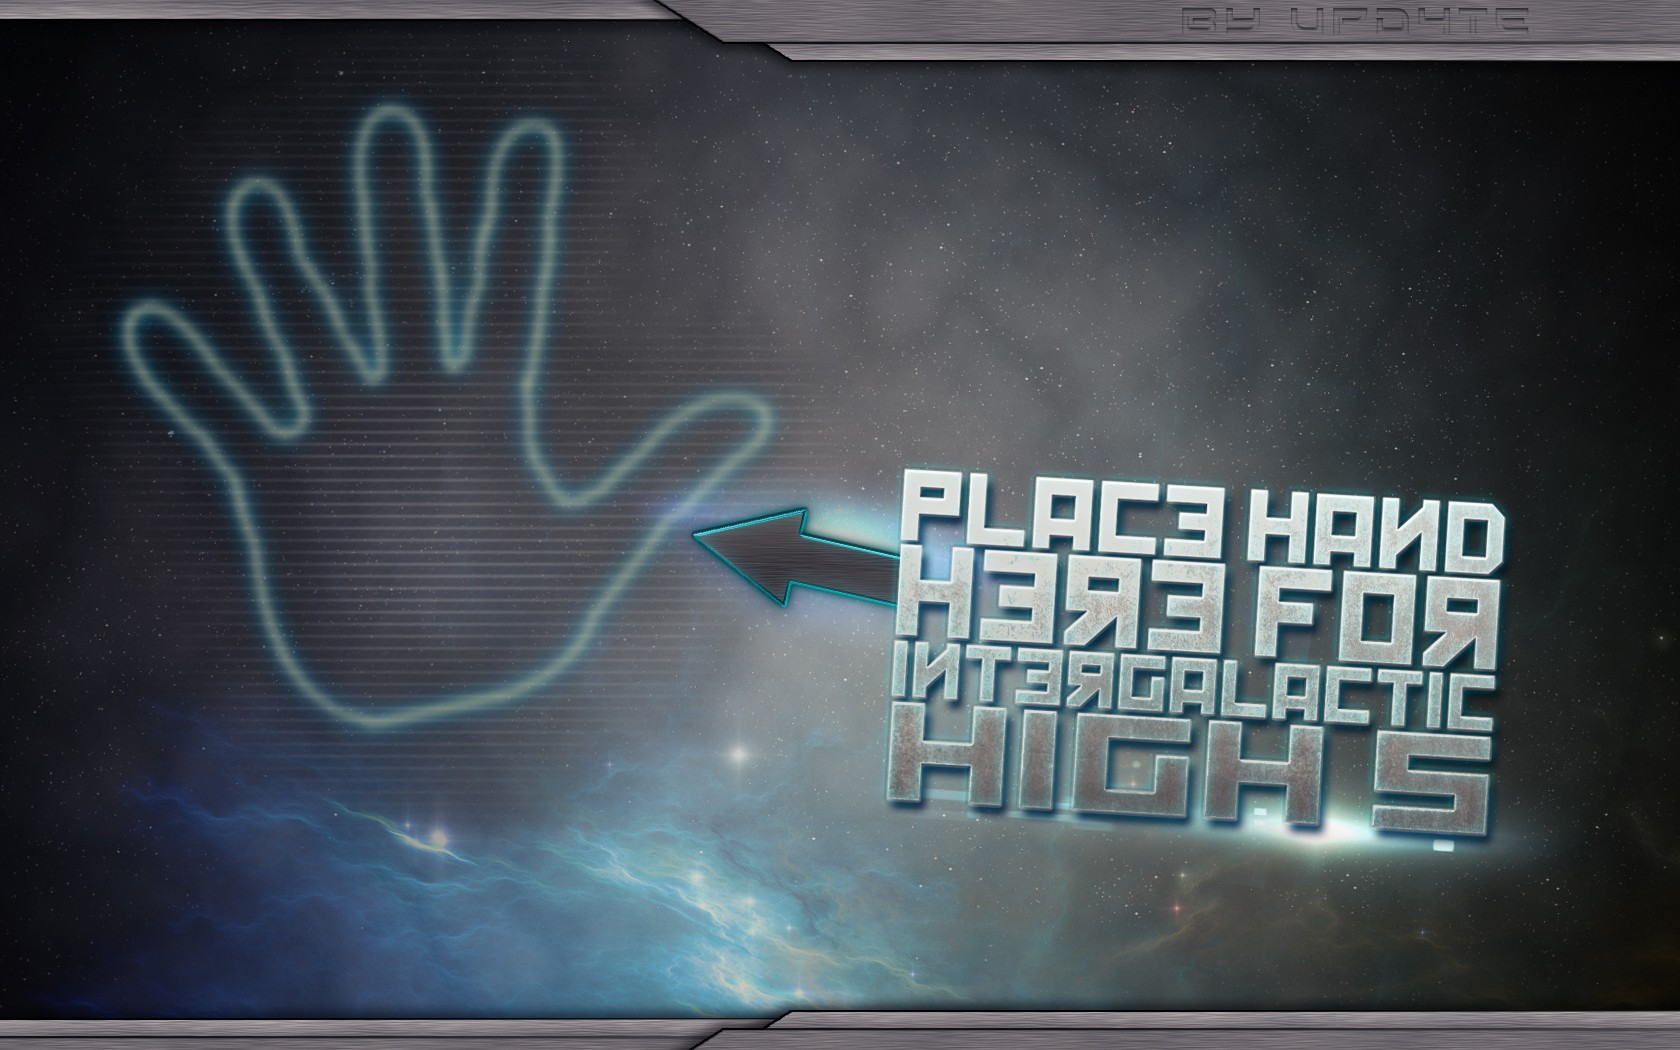 High 5 Wallpapers Intergalactic High 5 Myspace Backgrounds